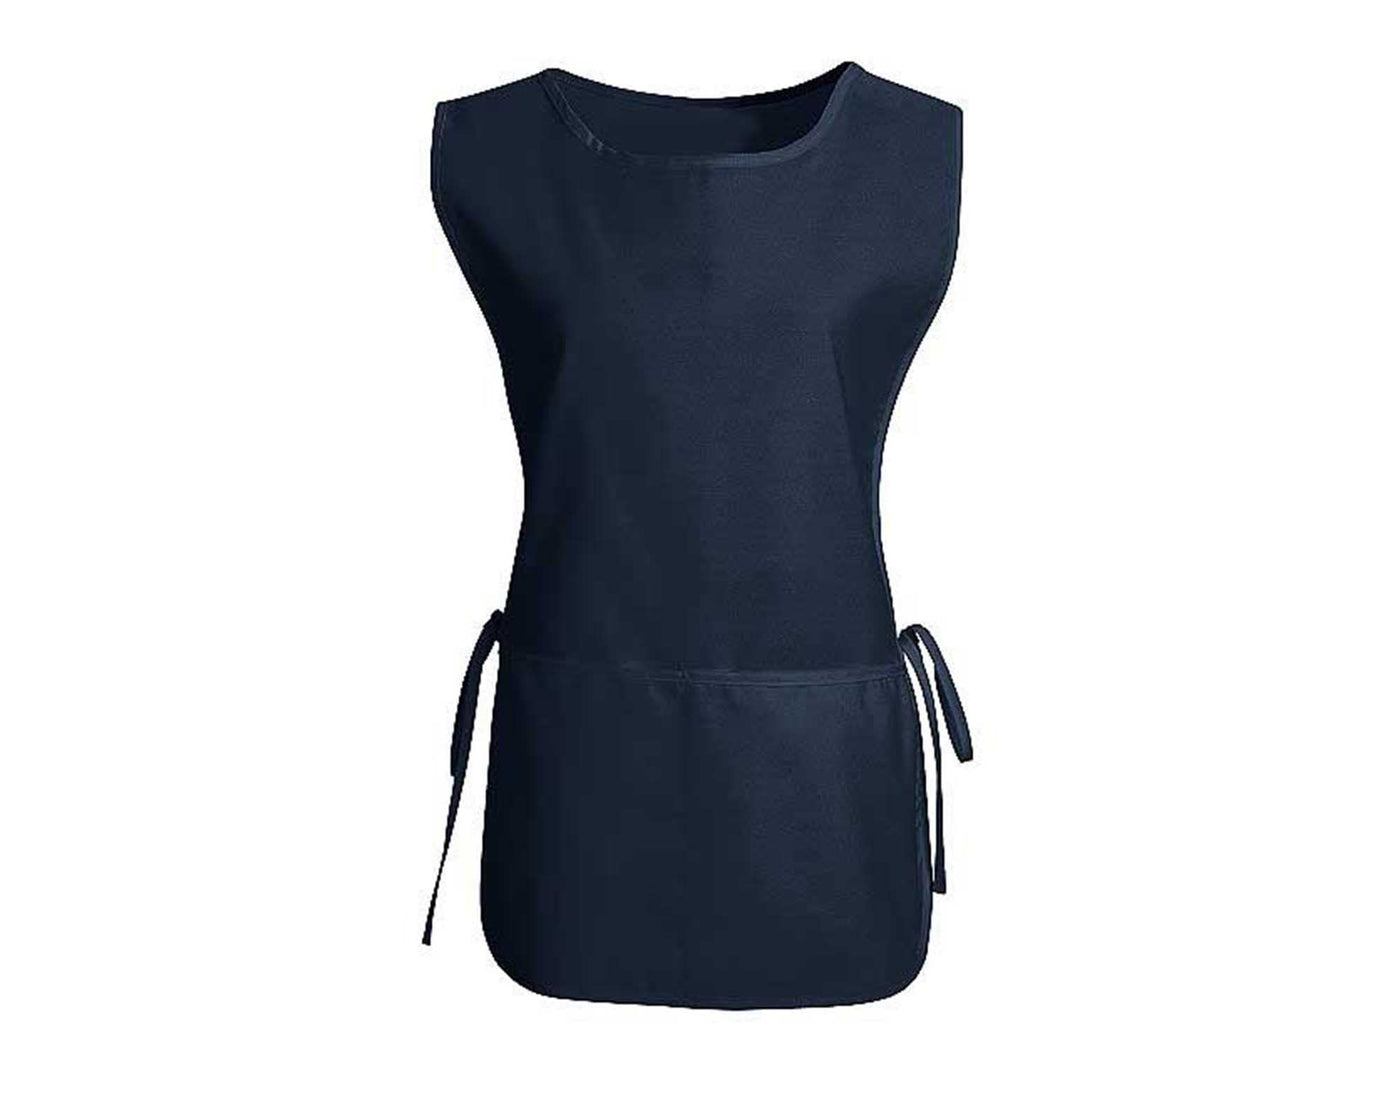 Navy blue cobbler apron with pocket and straps on the side